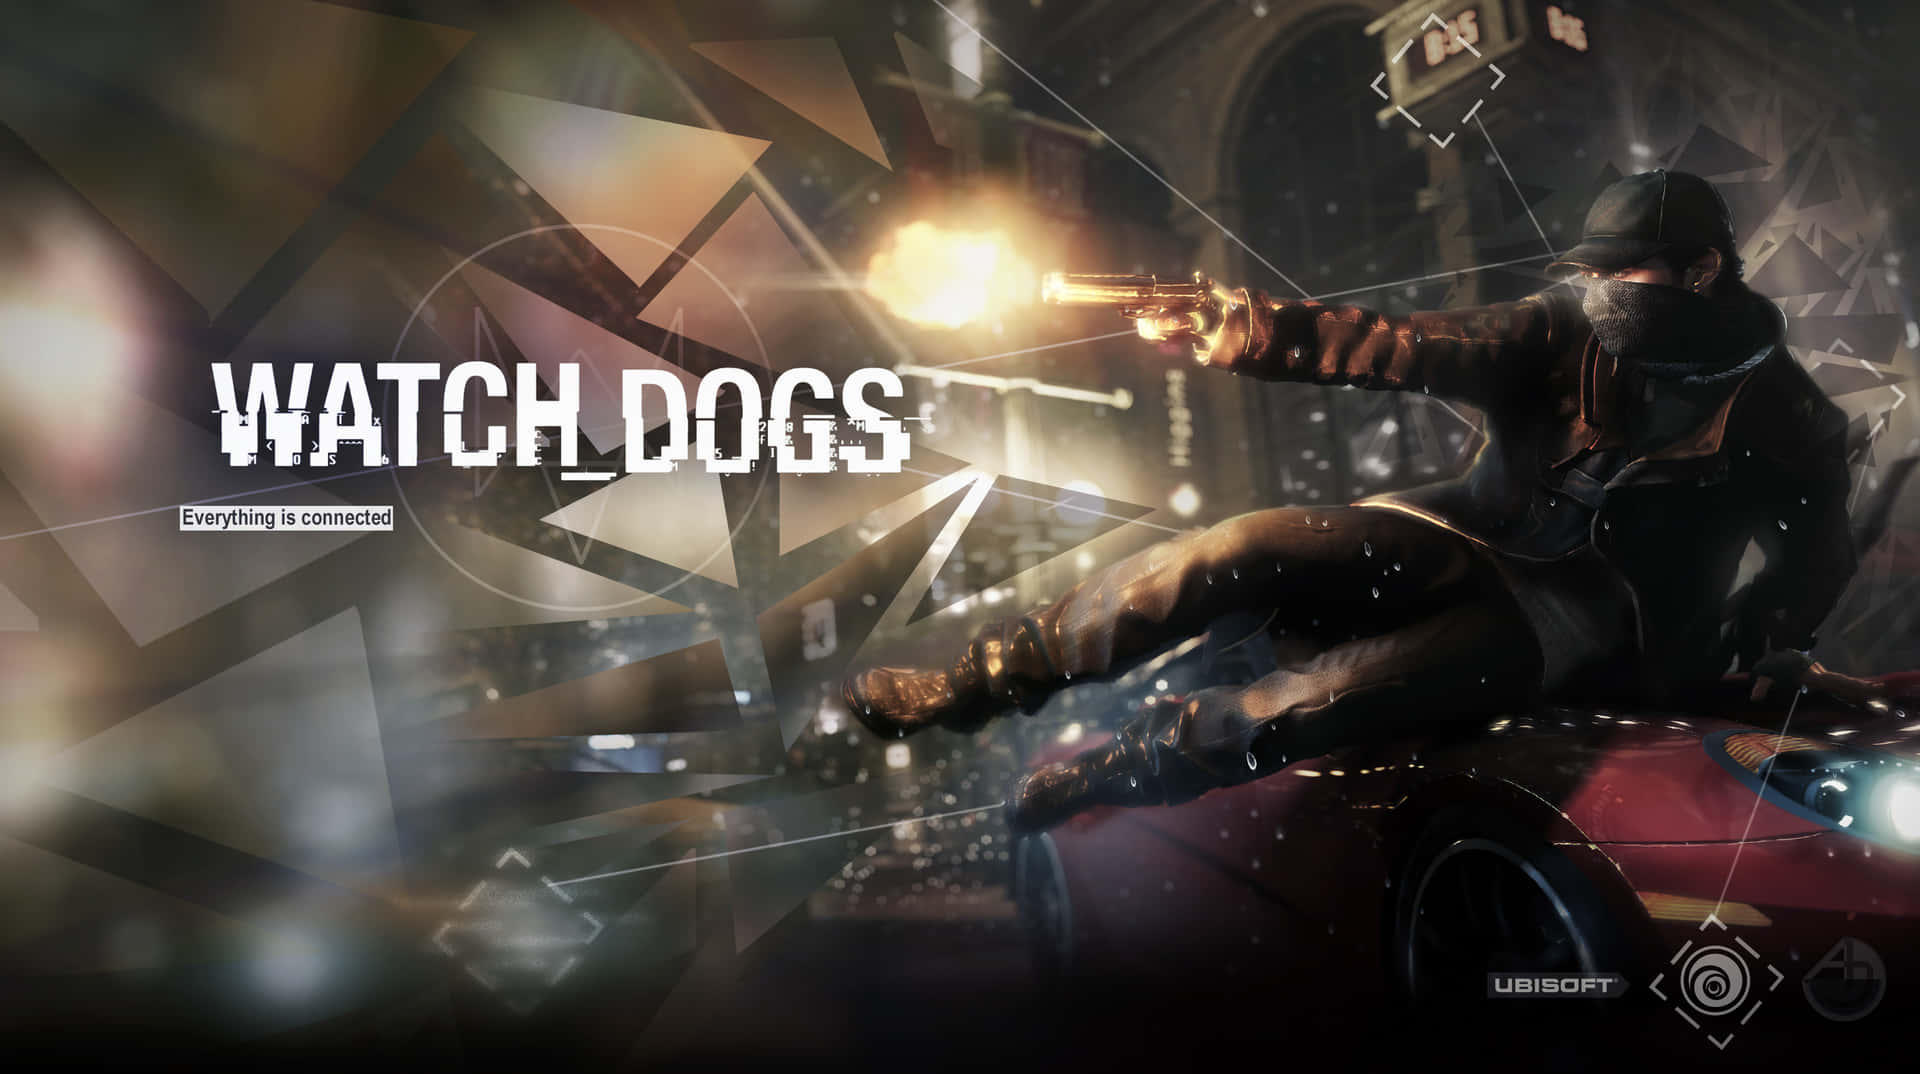 Hack your way to success and justice in Watch Dogs Wallpaper